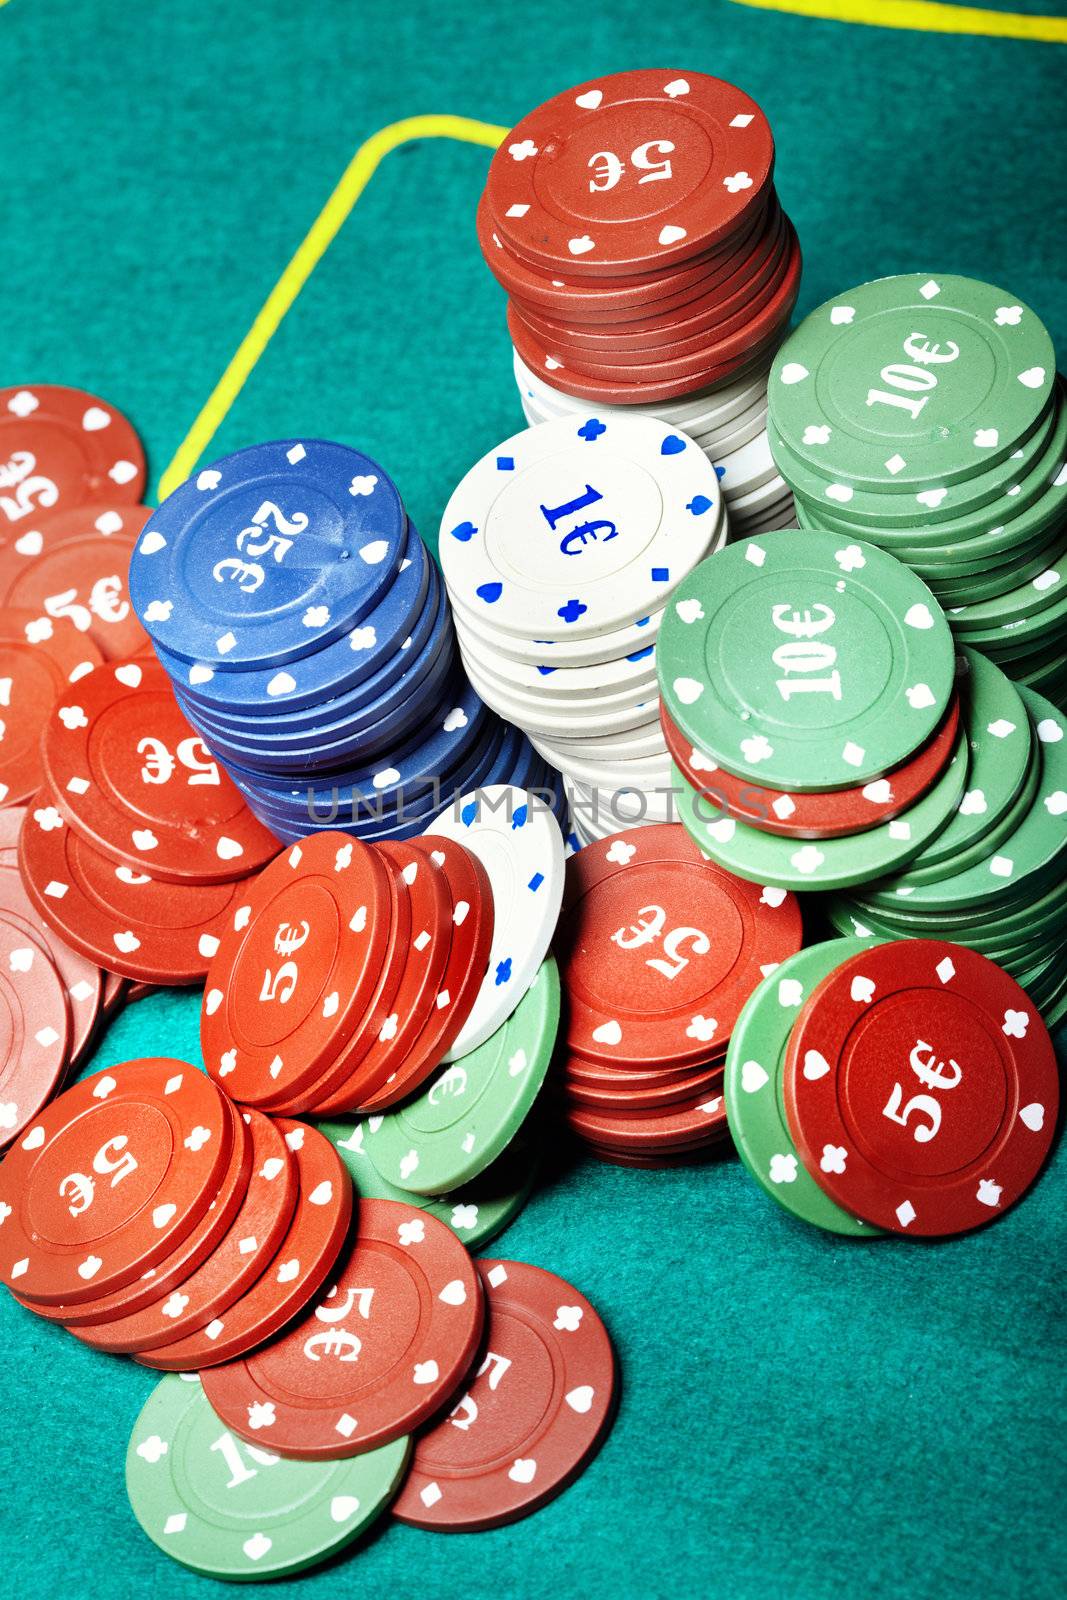 Vertical close-up photo of the various casino chips on a green table